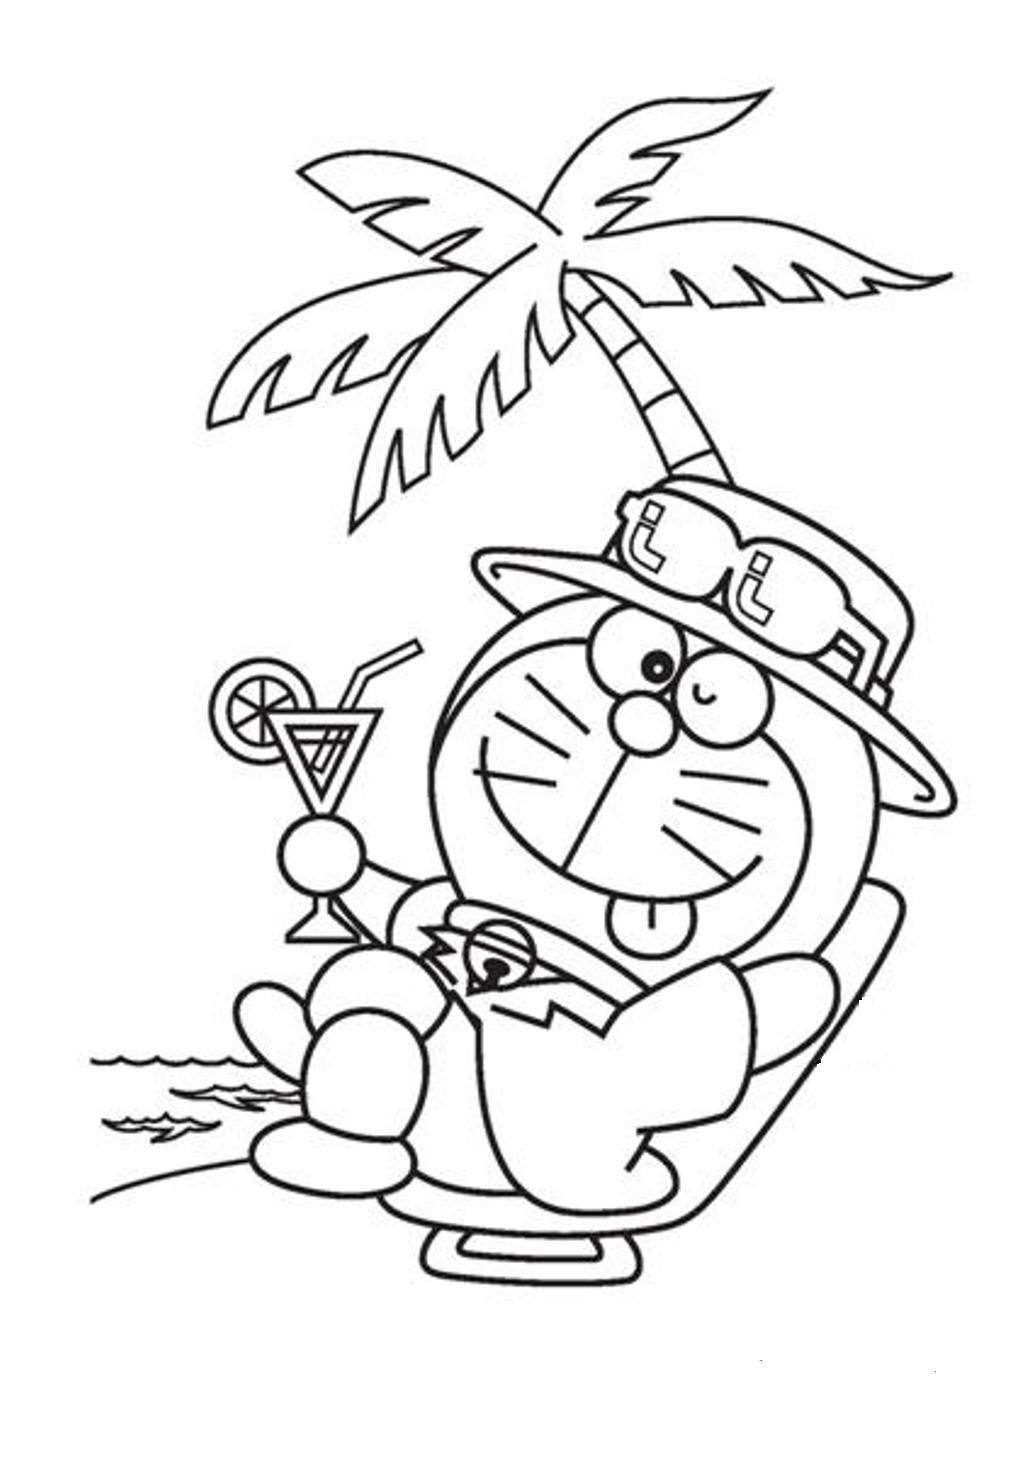 Doraemon At The Beach Coloring Page - Free Printable Coloring Pages for Kids